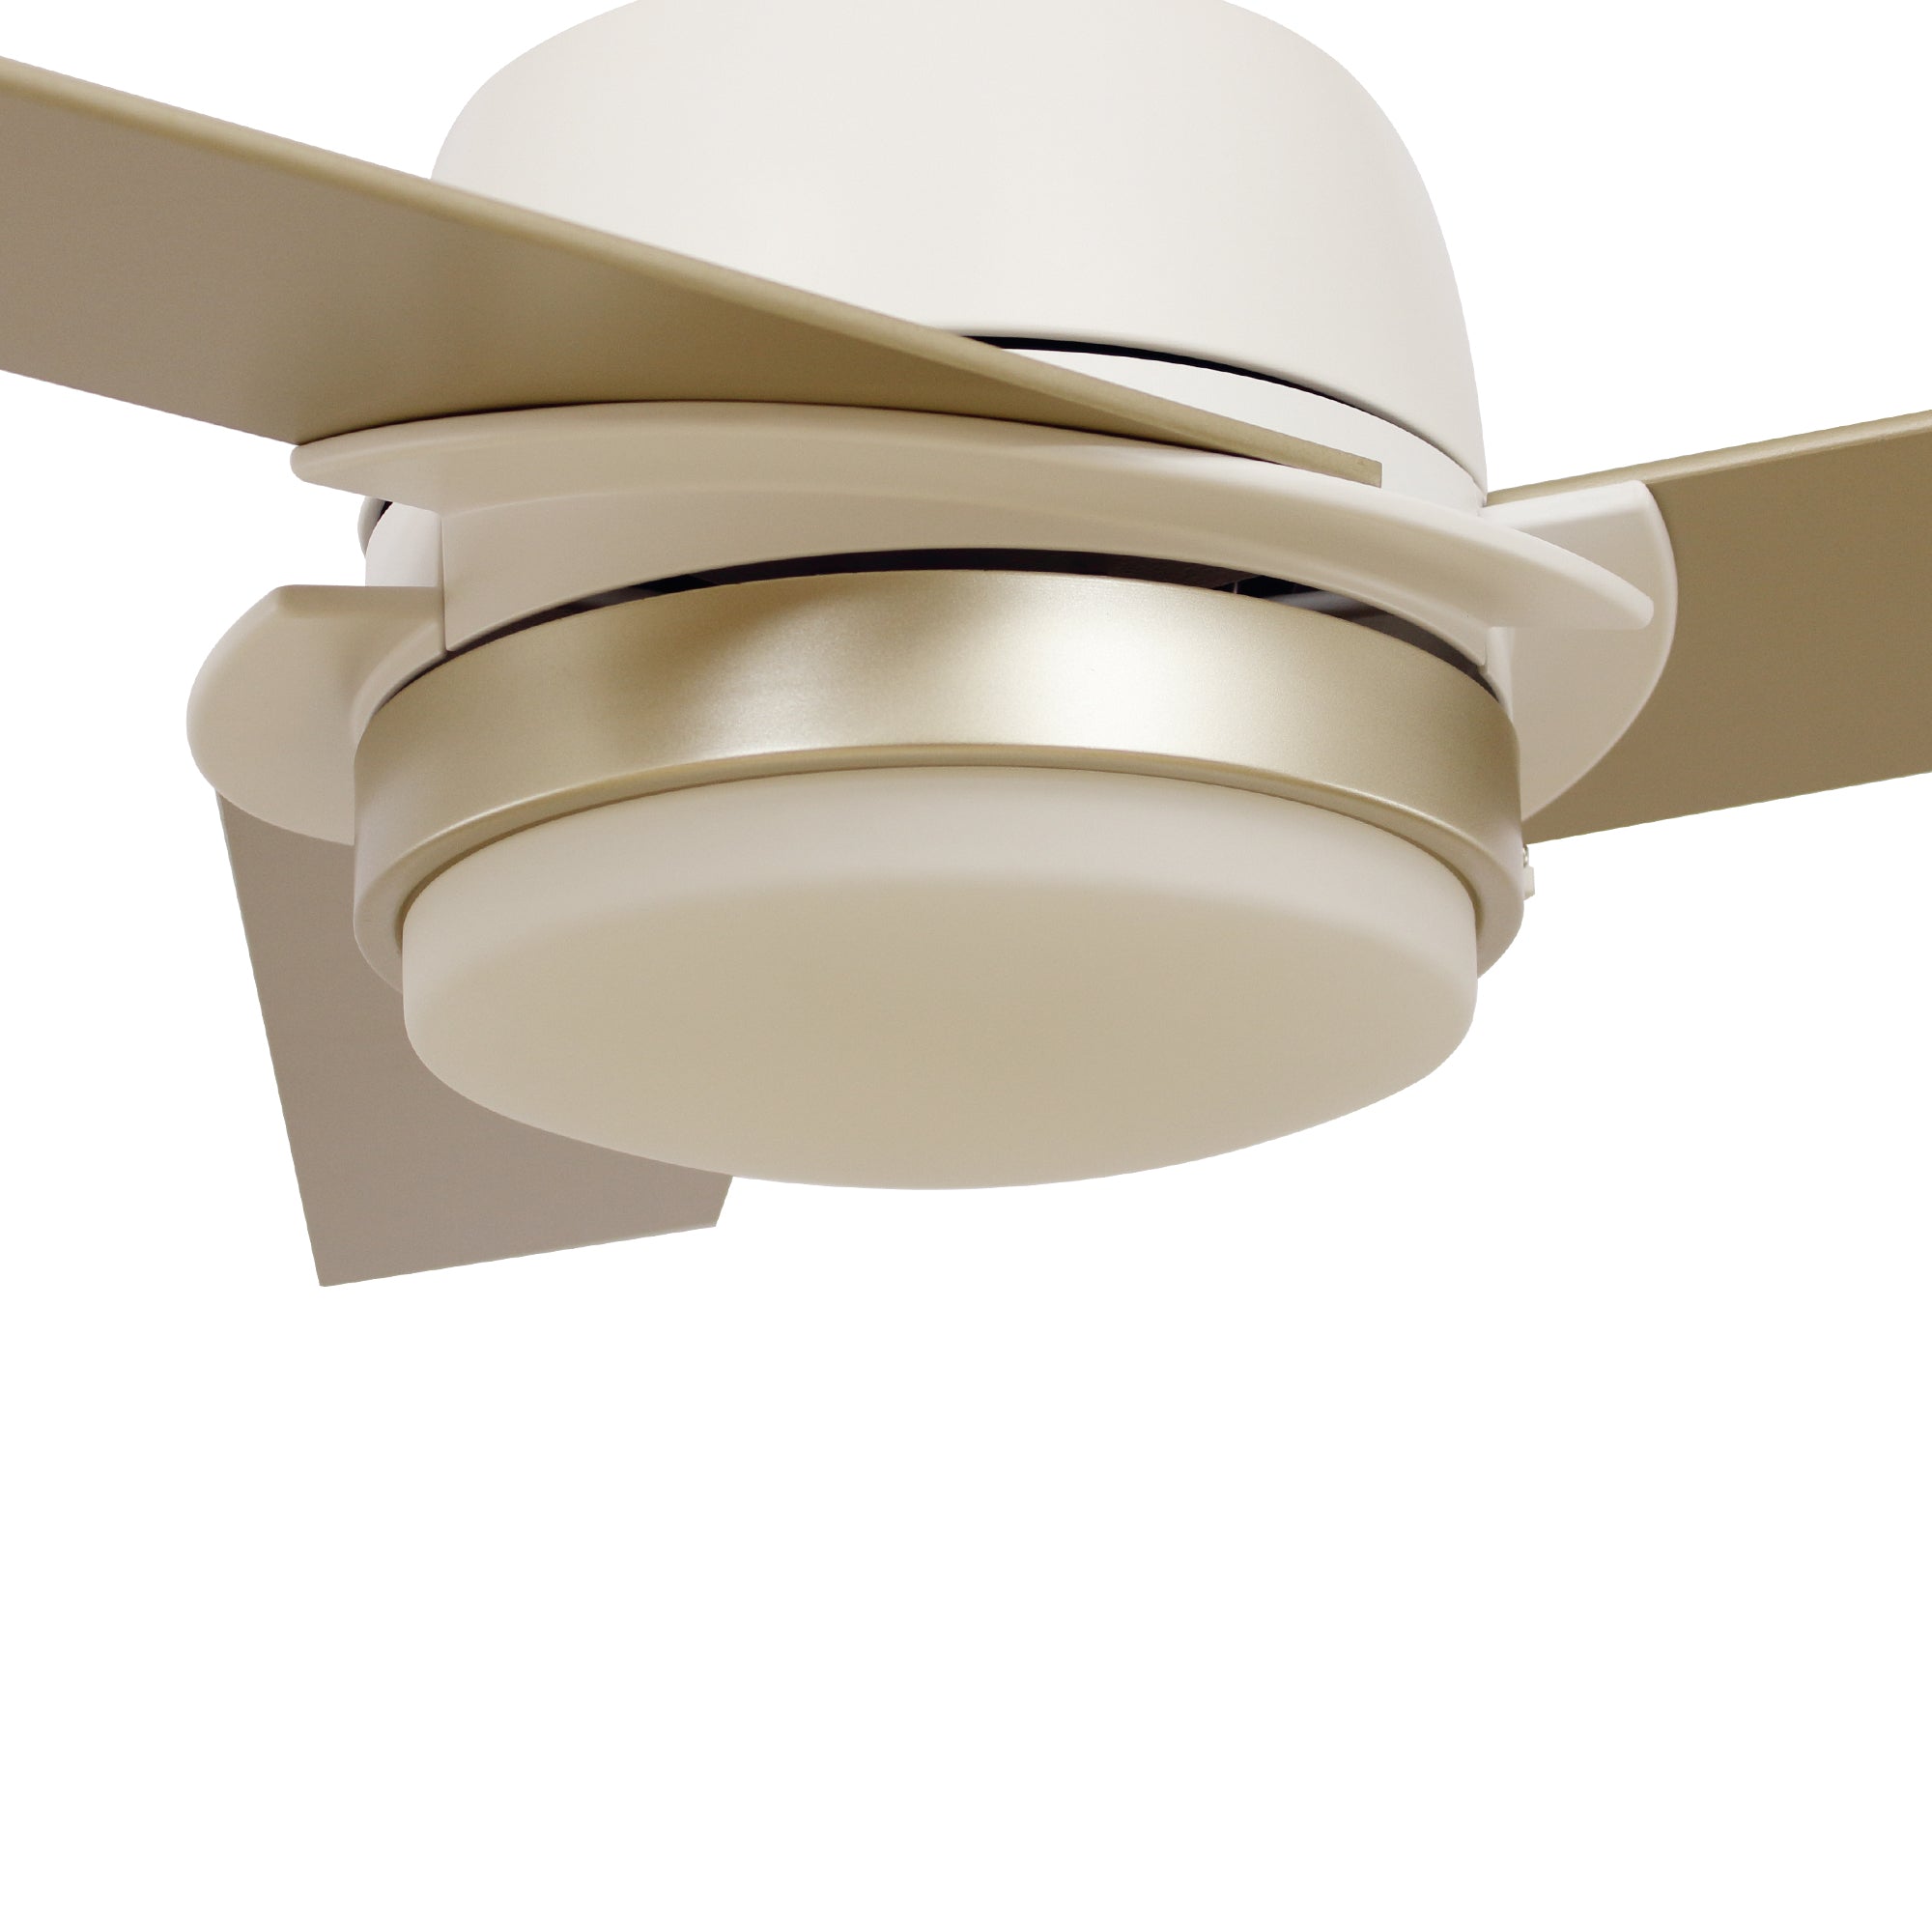 This Smafan Addison 52'' Smart Ceiling Fan keeps your space cool, bright, and stylish. It is a soft modern masterpiece perfect for your large indoor living spaces. This Wifi smart ceiling fan is a simplicity designing with White finish, use elegant Plywood blades and compatible with LED Light. The fan features wall control, Wi-Fi apps, Siri Shortcut and Voice control technology (compatible with Amazon Alexa and Google Home Assistant ) to set fan preferences. #color_White